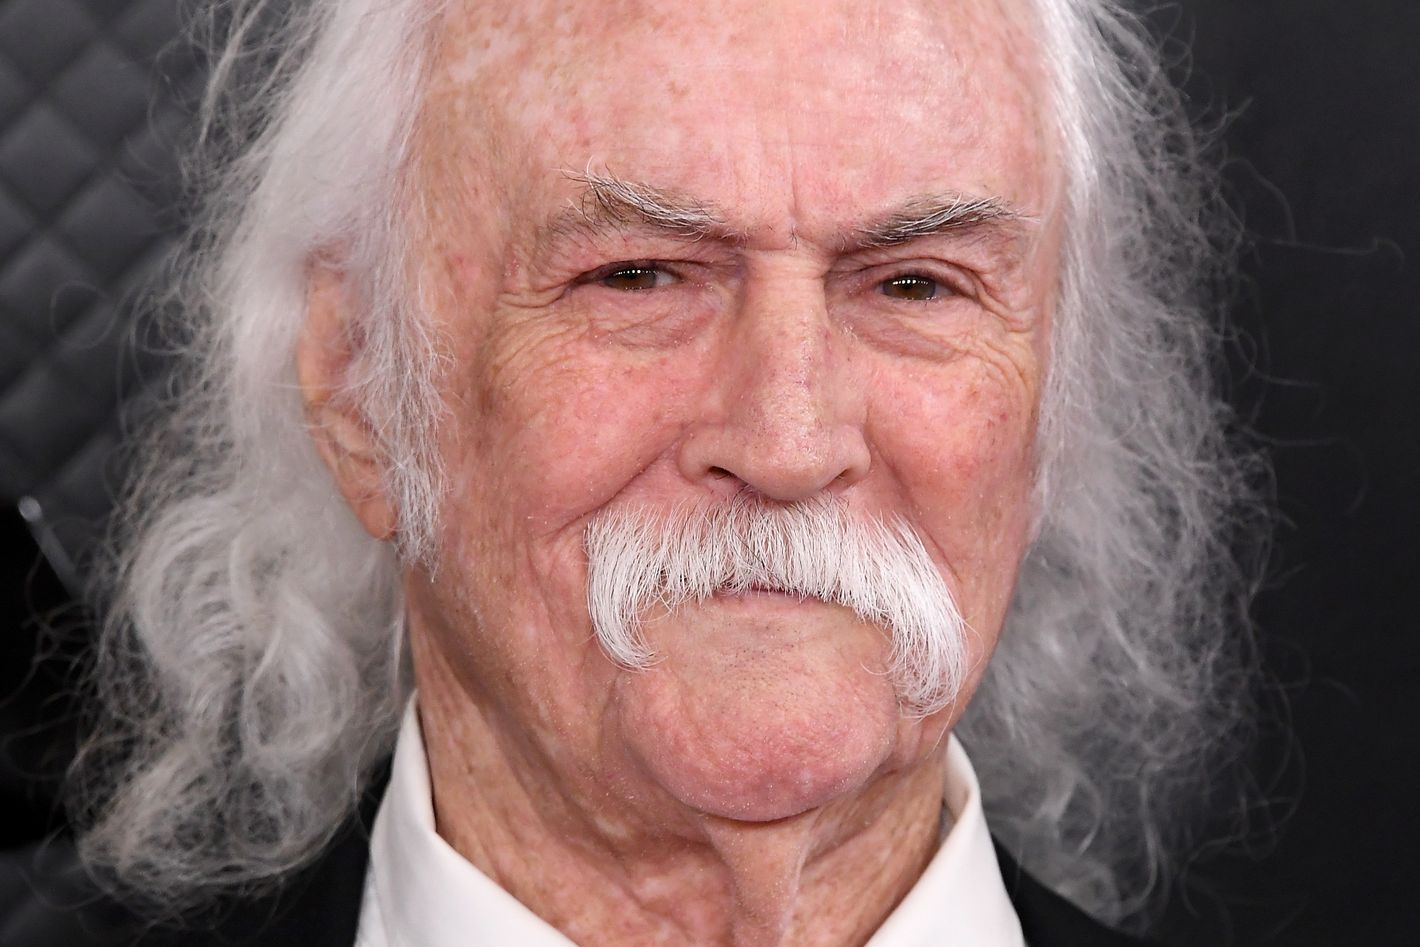 PSA: David Crosby Could Be Your Father